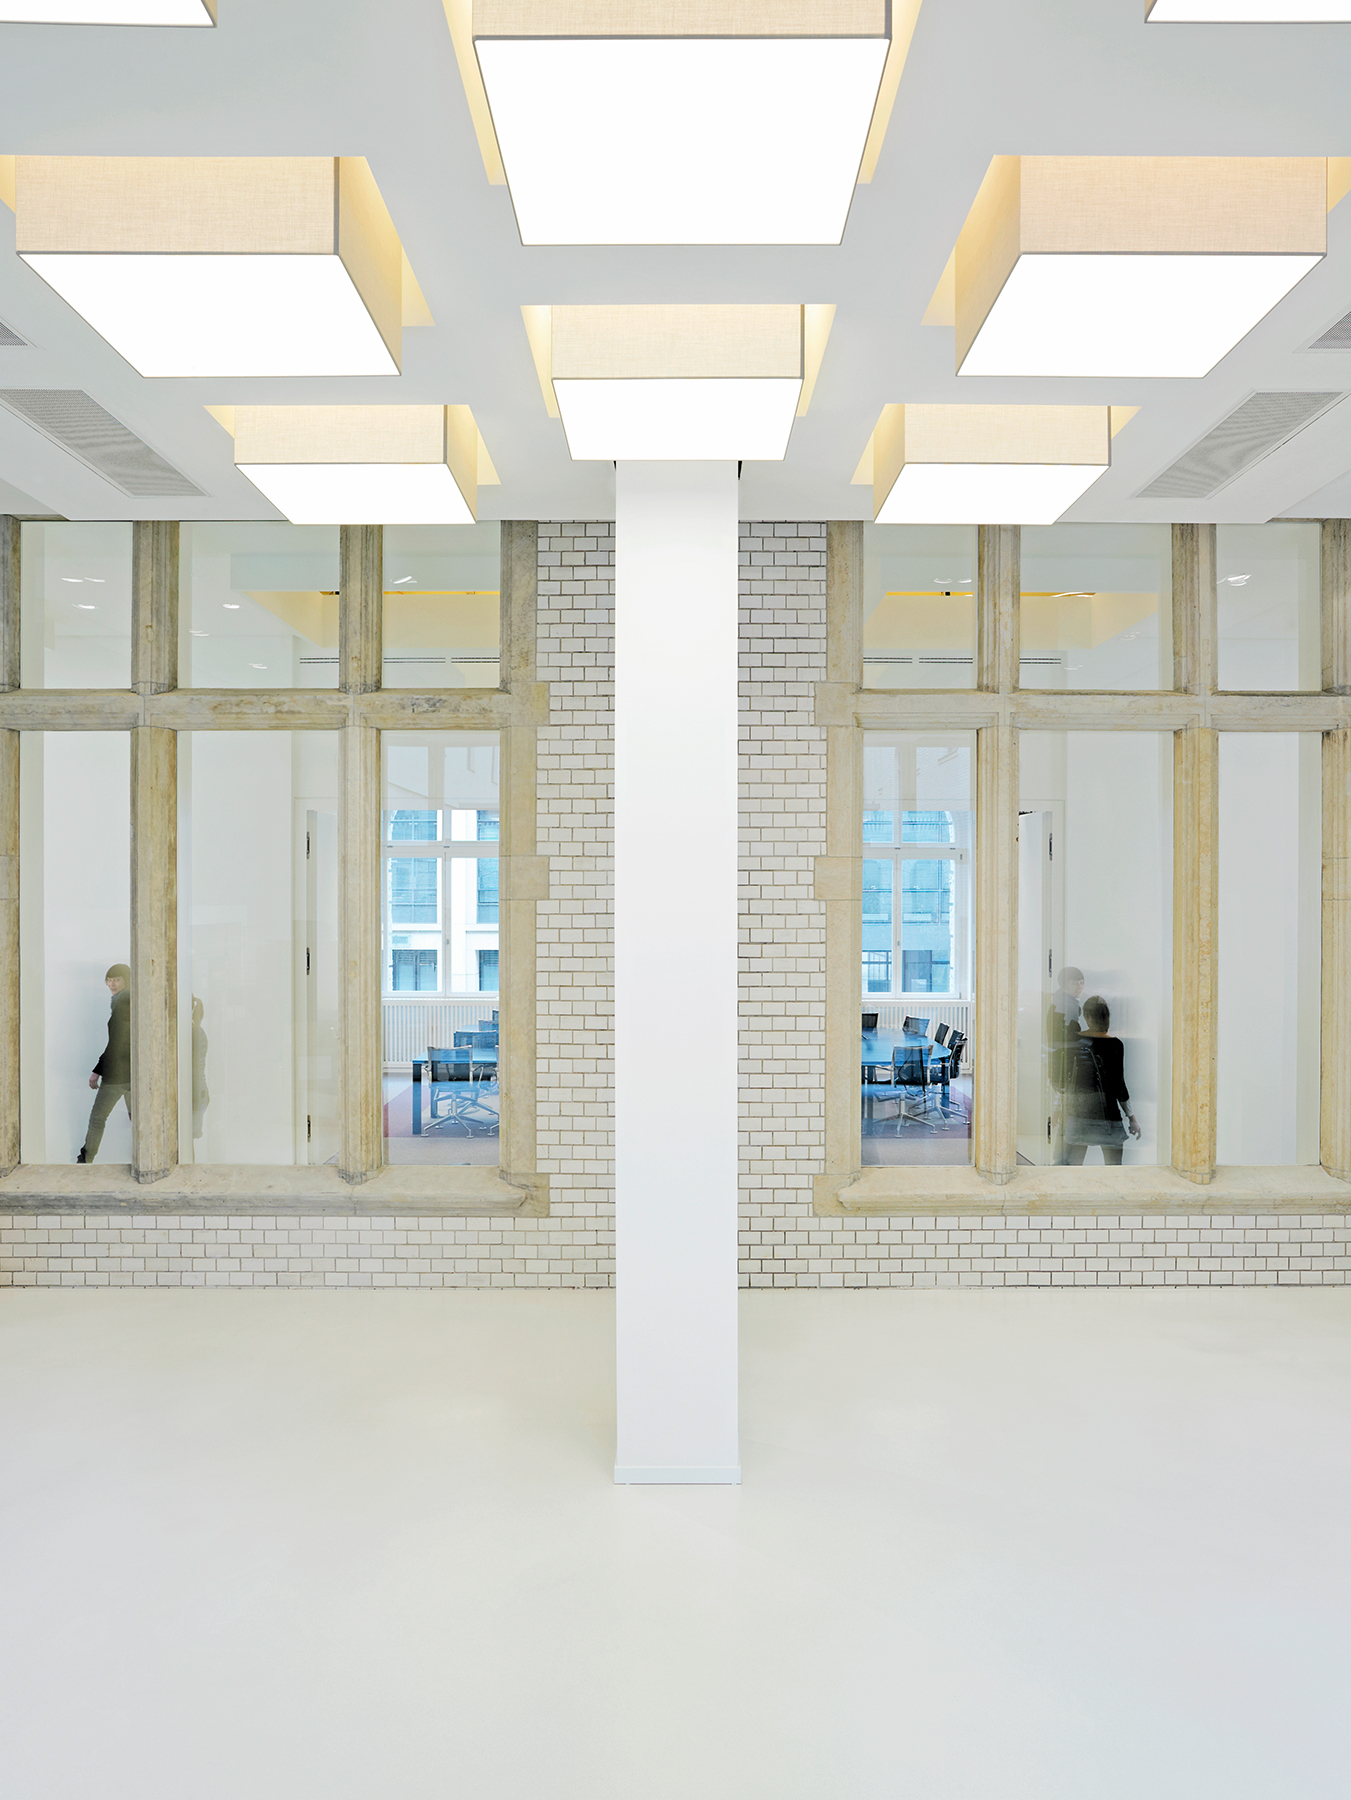 CUBIC FRAME ceiling lights set into a ceiling at the VDA, Berlin.